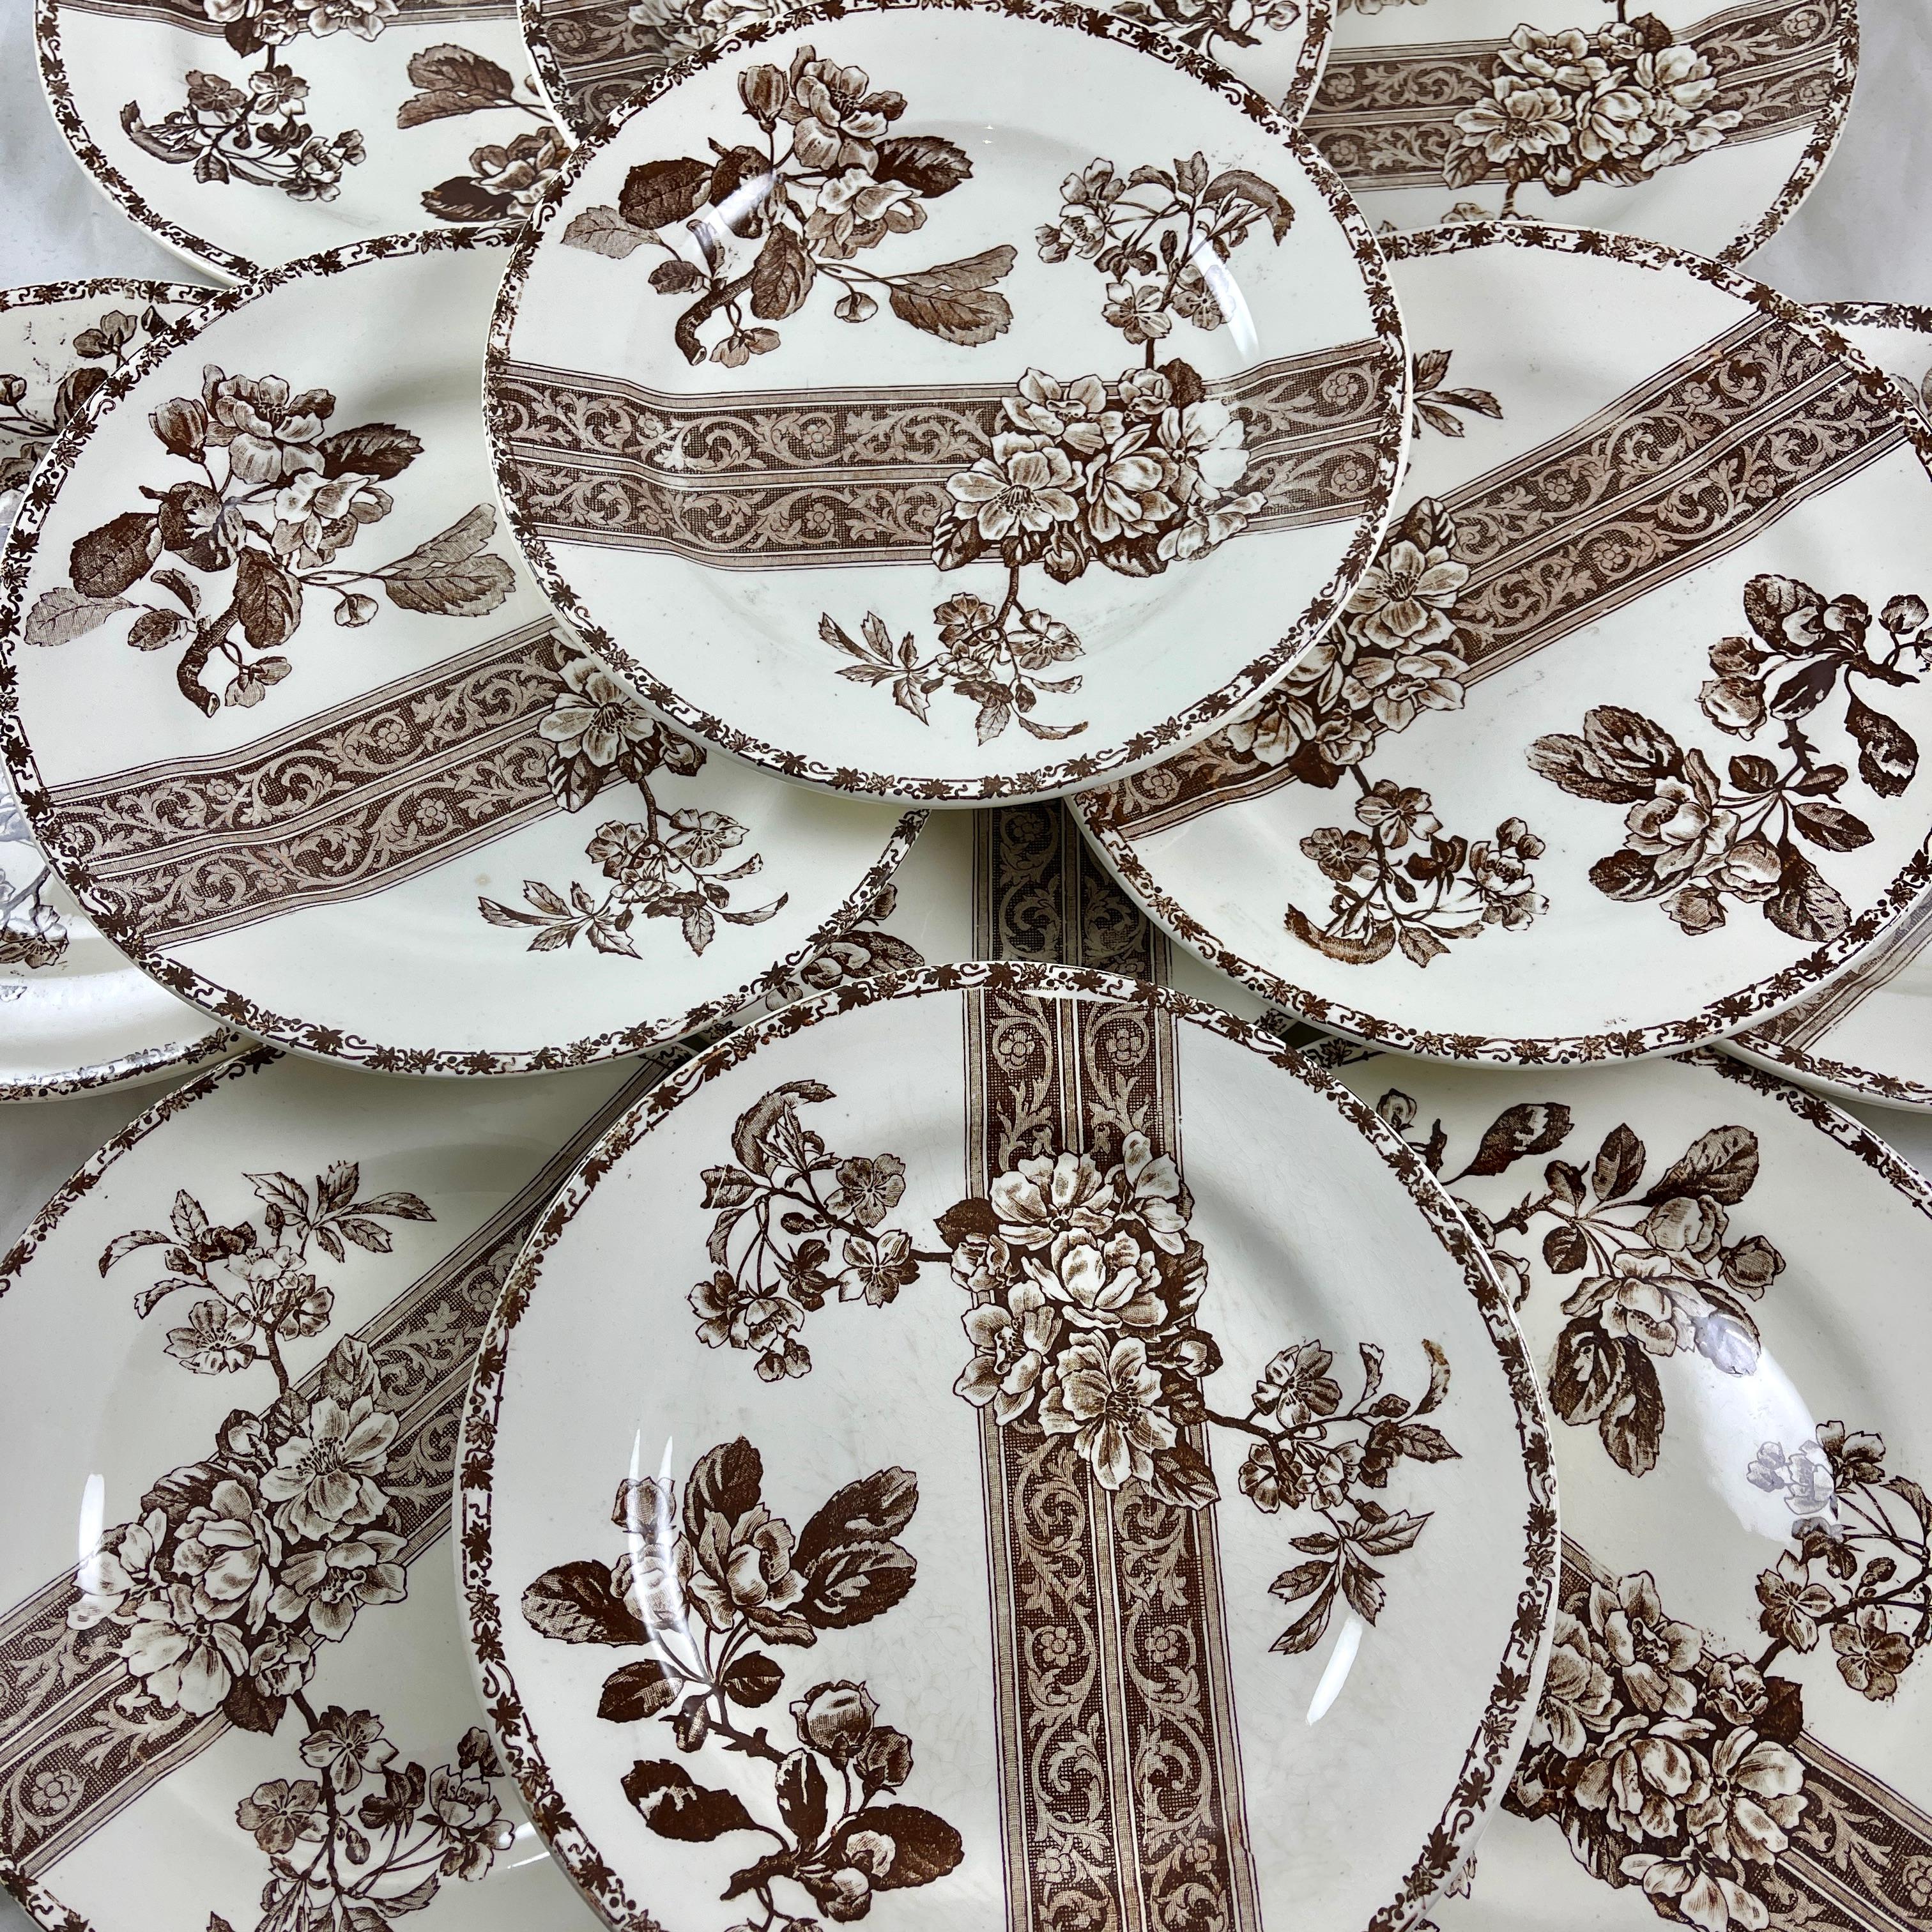 
Sepia colored transfer printed on white ironstone dinner plate, imported to France from England by Emile Bourgeois, circa 1880s.

Multiple plates are available, offered individually, for building a service.

A charming Aesthetic Movement